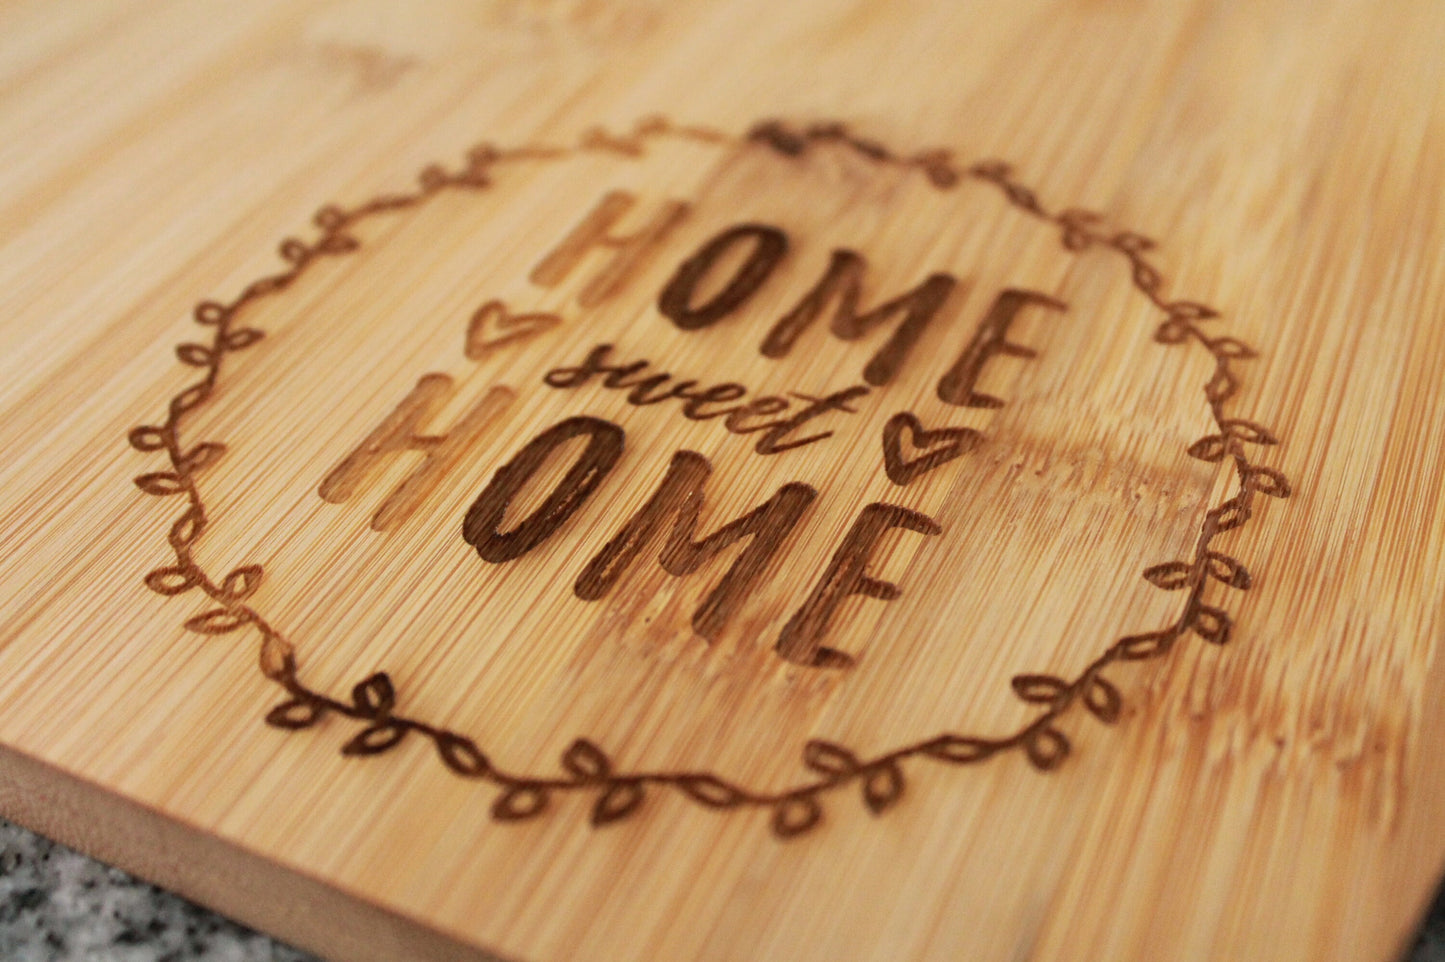 Wooden Engraved Cutting Board Home Sweet Home New Home Gift Hostess Culinary Couple Wedding engagement Hardwood Cute Kitchen Decor Natural